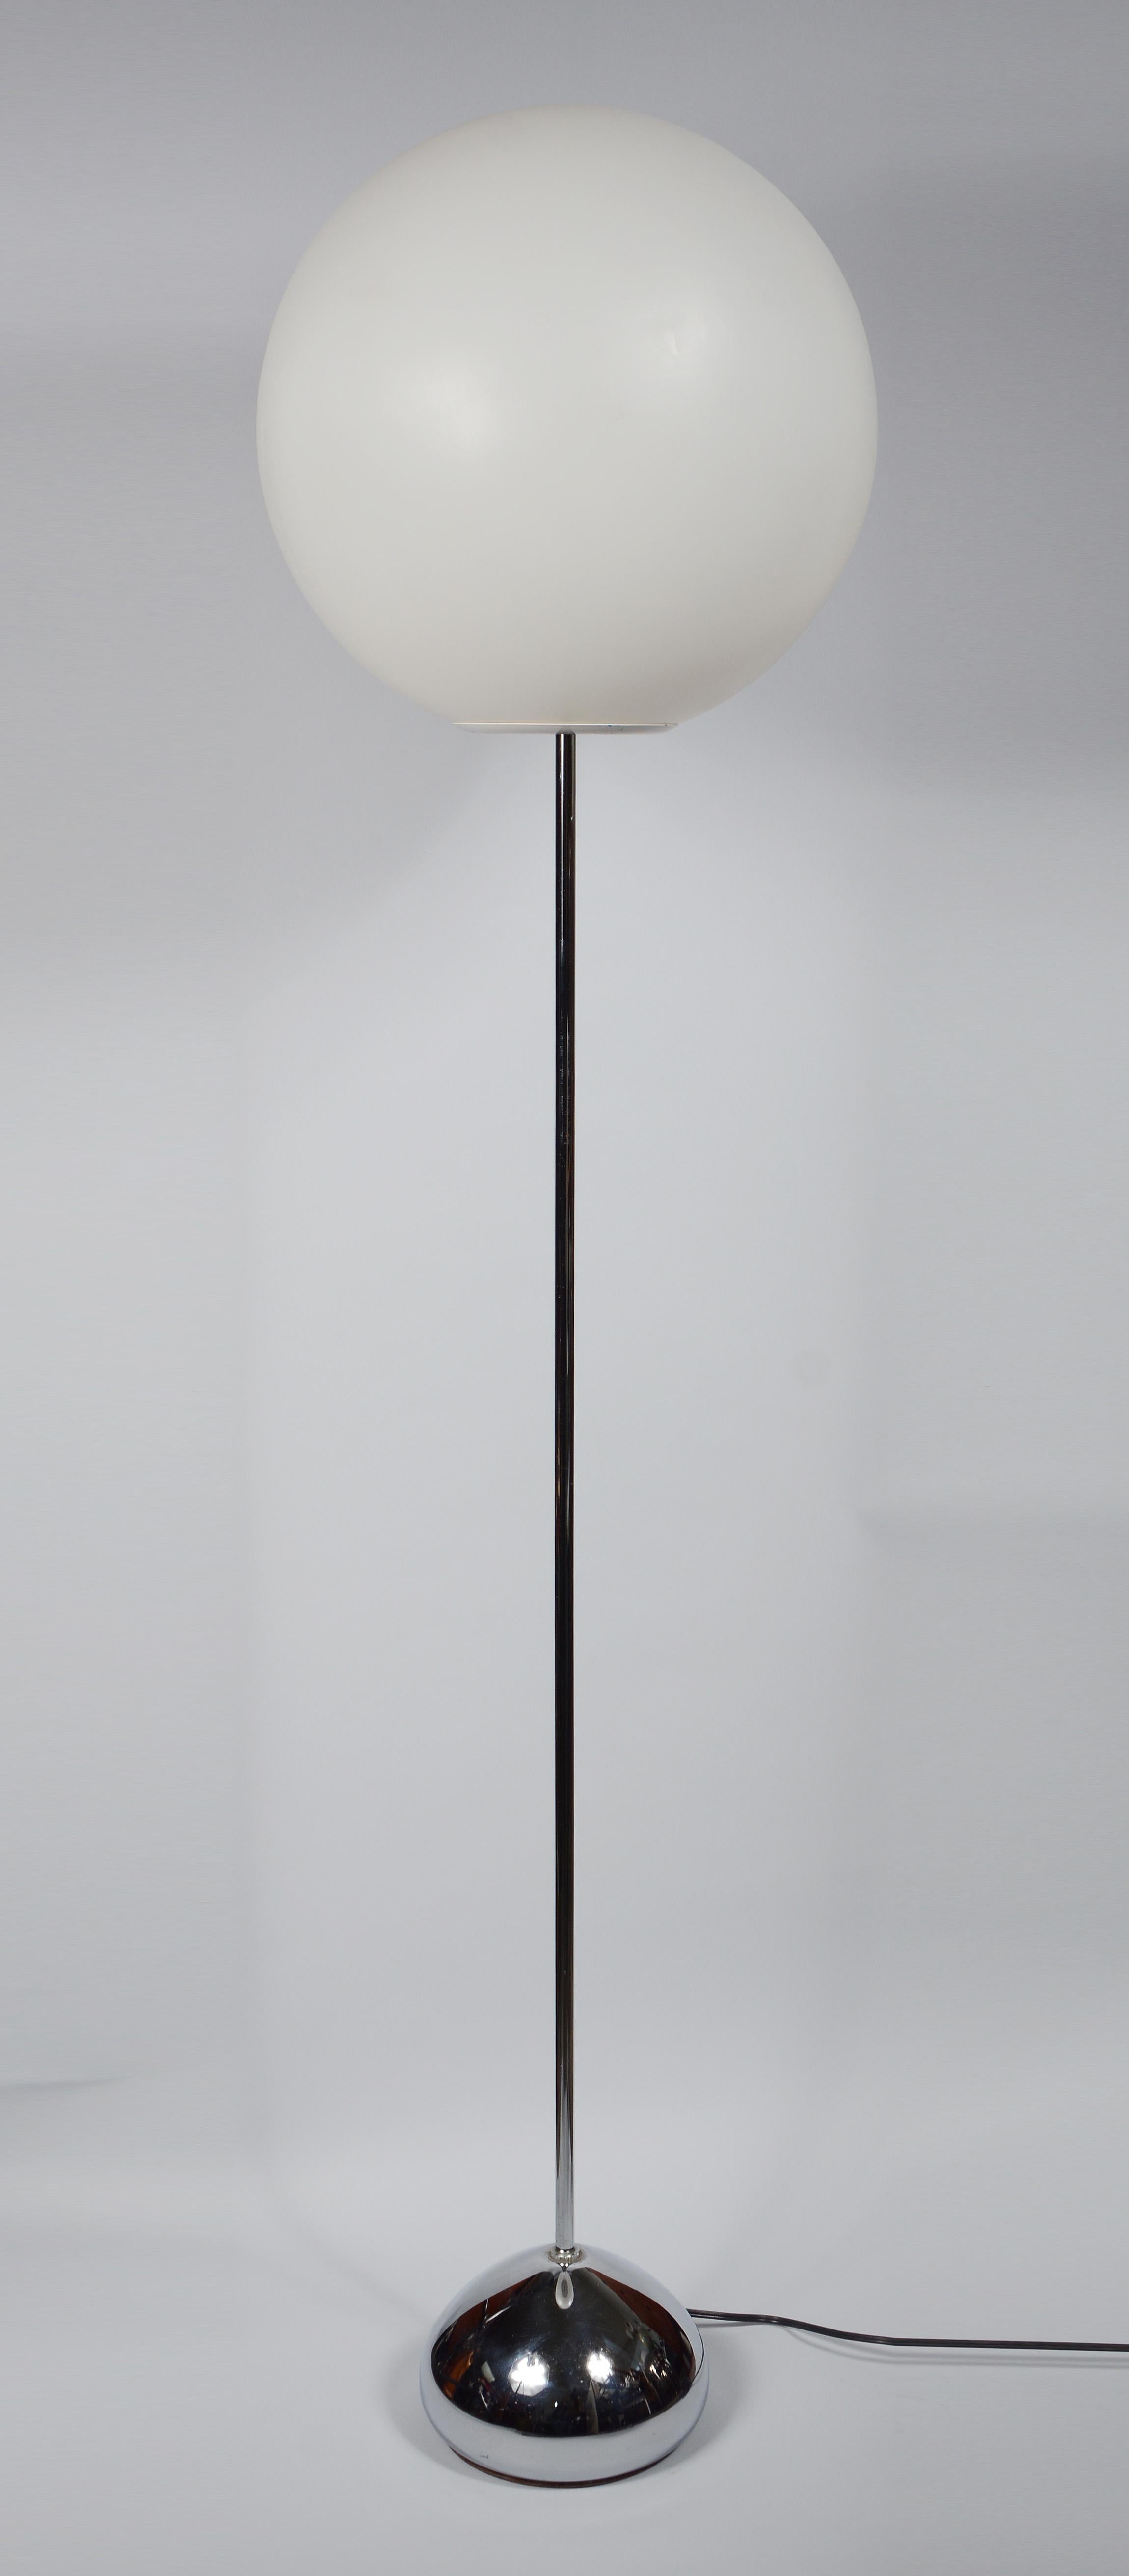 Chrome modernist floor lamp by Robert Sonneman. This has a teardrop shaped chrome base with a large plastic globe shade.